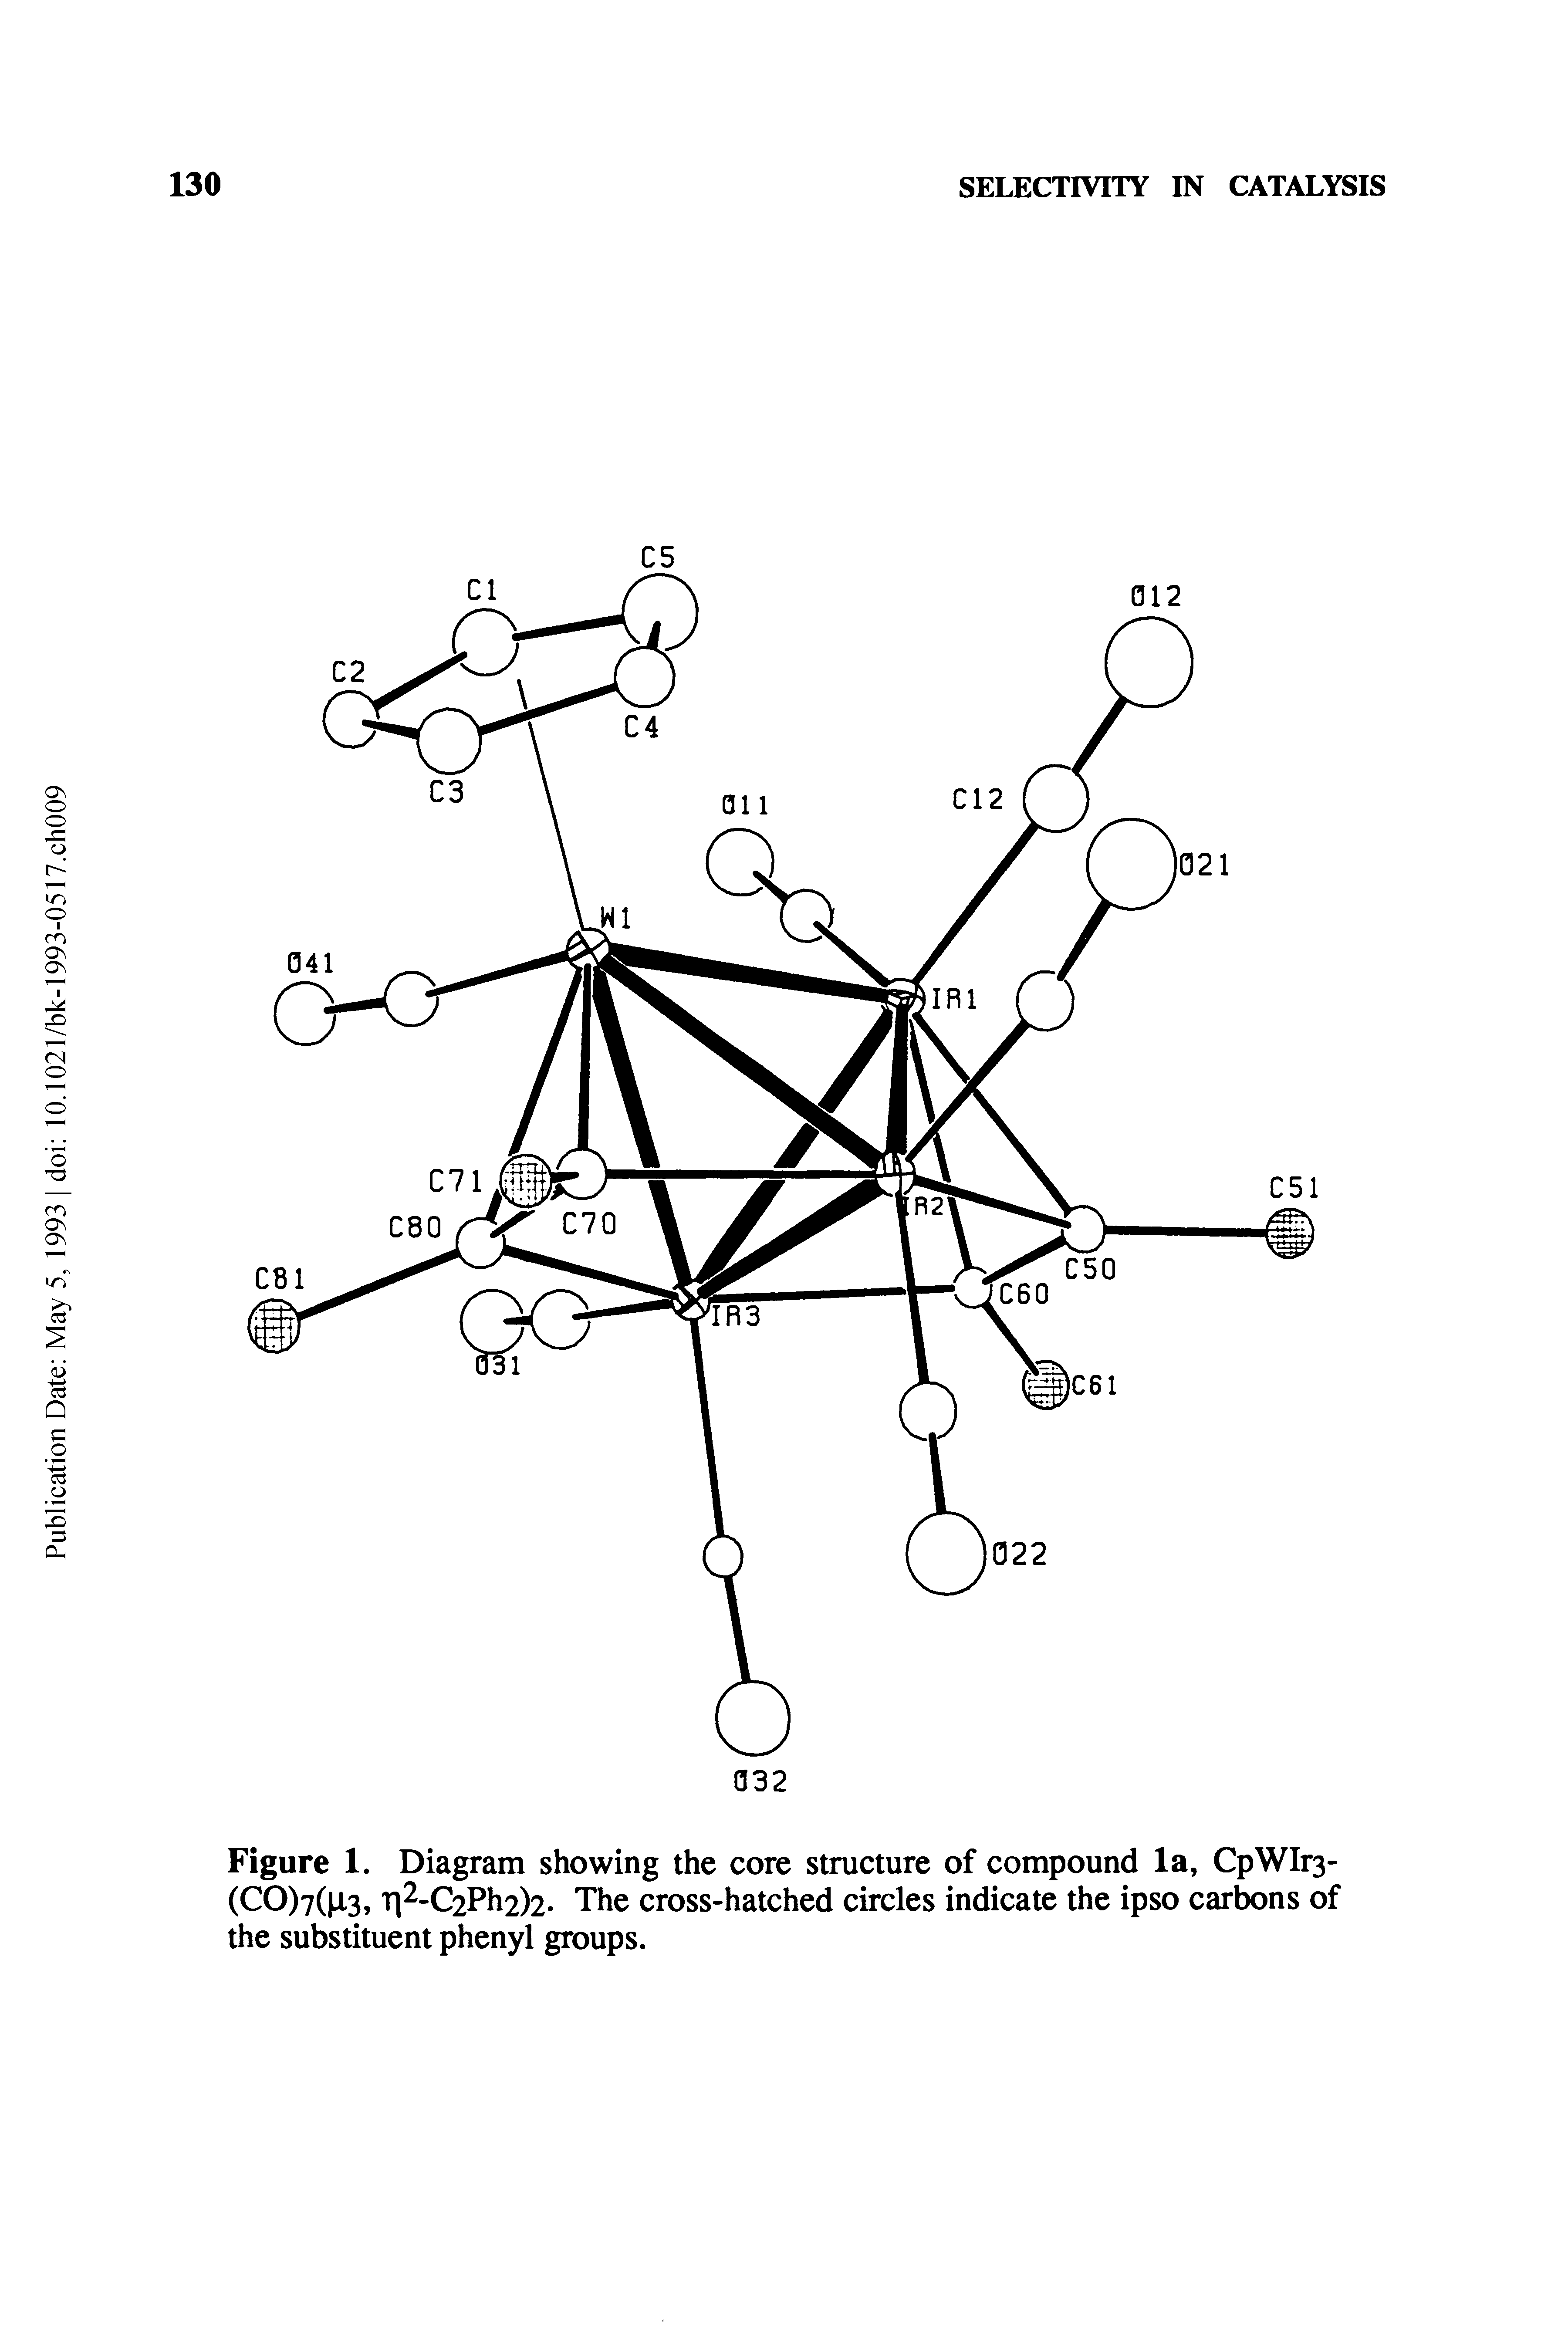 Figure 1. Diagram showing the core structure of compound la, CpWIr3-(CO)7( i3, T 2-C2Ph2)2 The cross-hatched circles indicate the ipso carbons of the substituent phenyl groups.